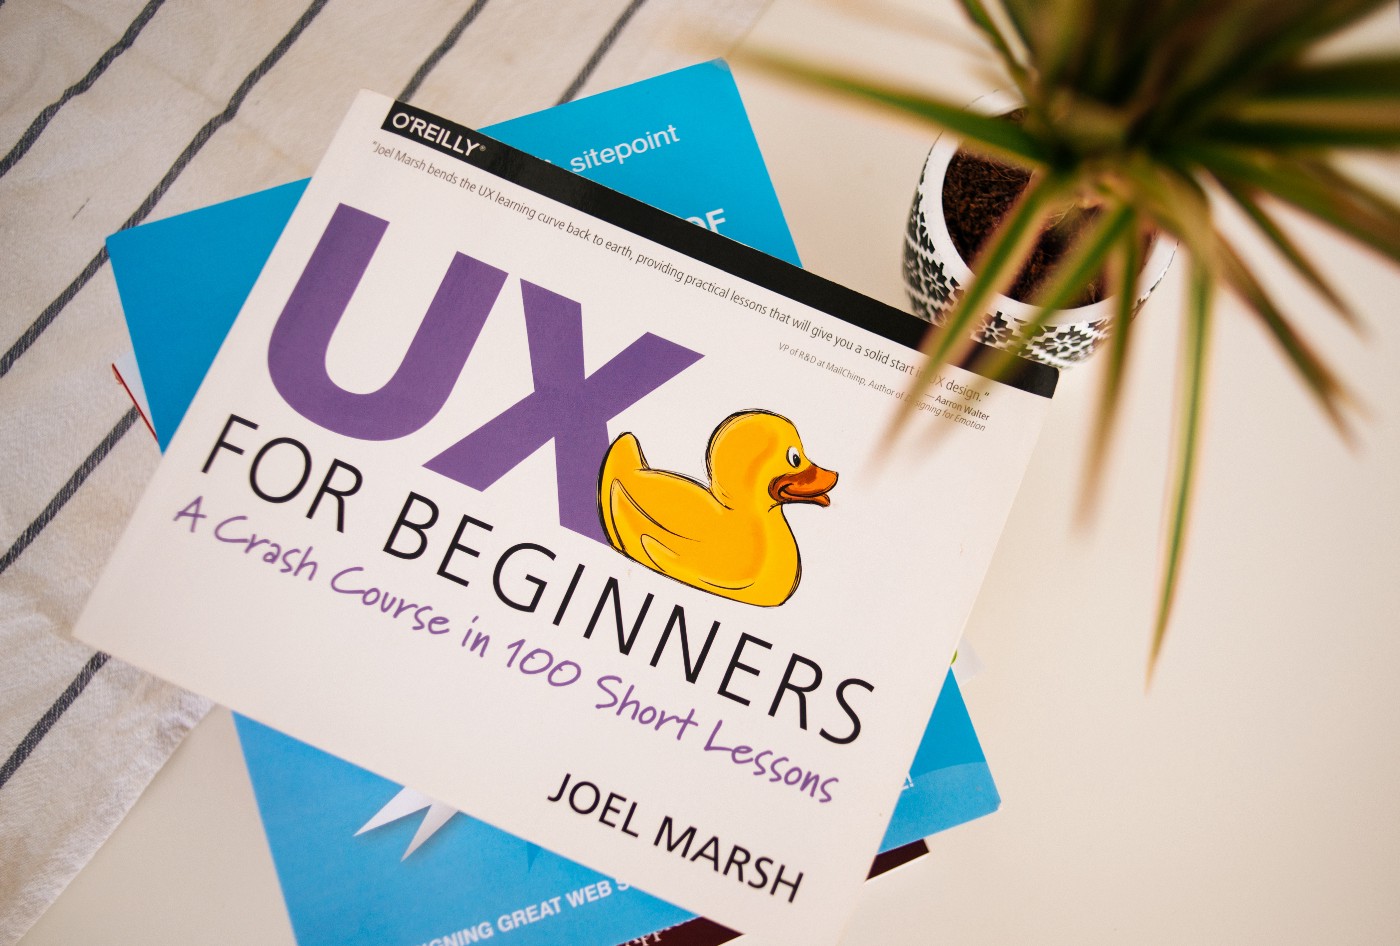 Photo of the book: “UX for beginners” by Joel Marsh - courtesy of Elena Putina